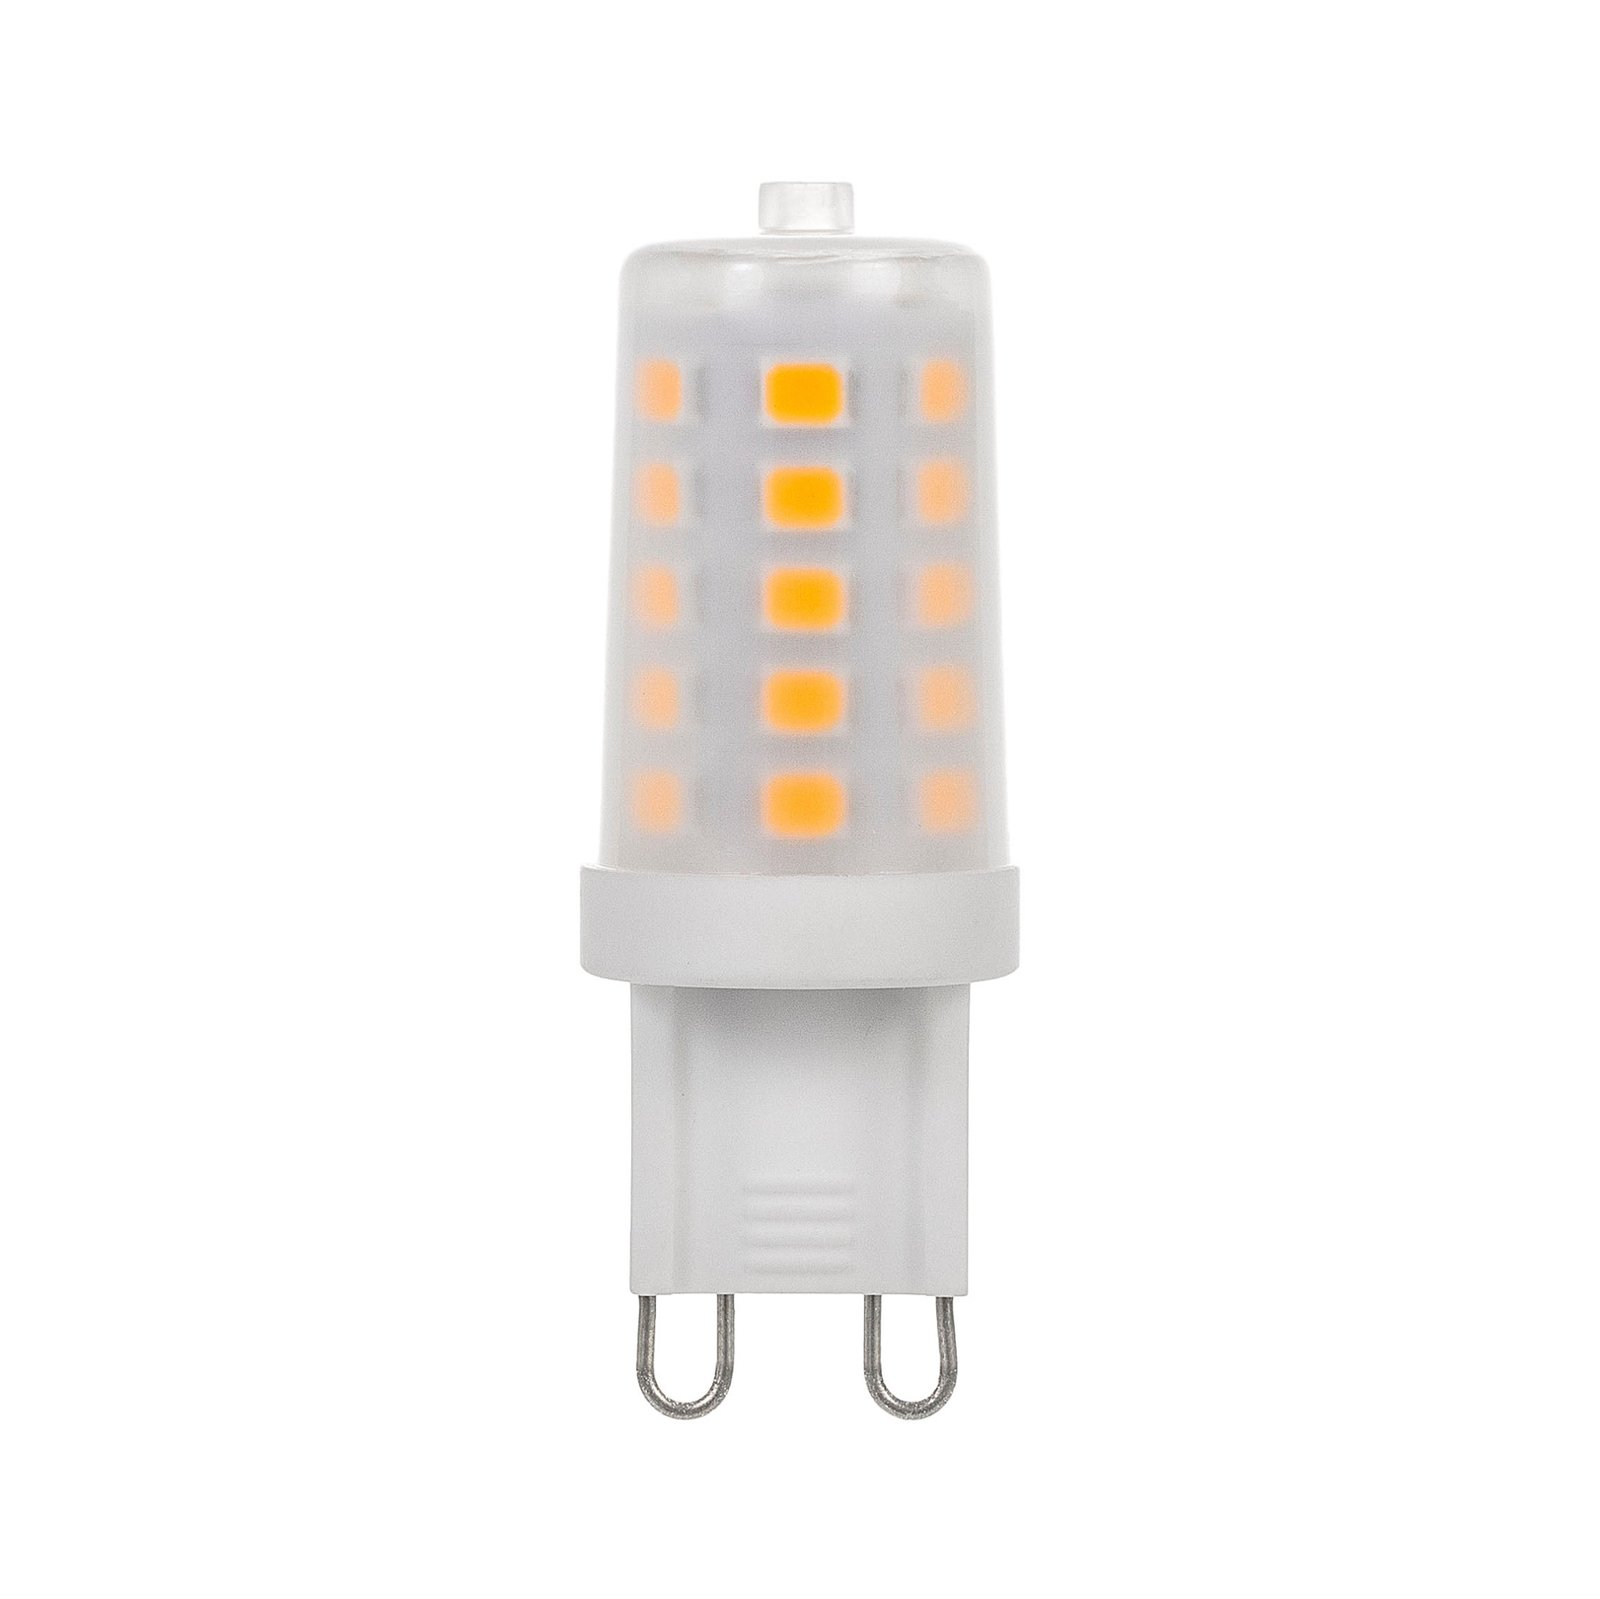 Lindby LED bulb G9 3W 2,700K 280lm dimmable